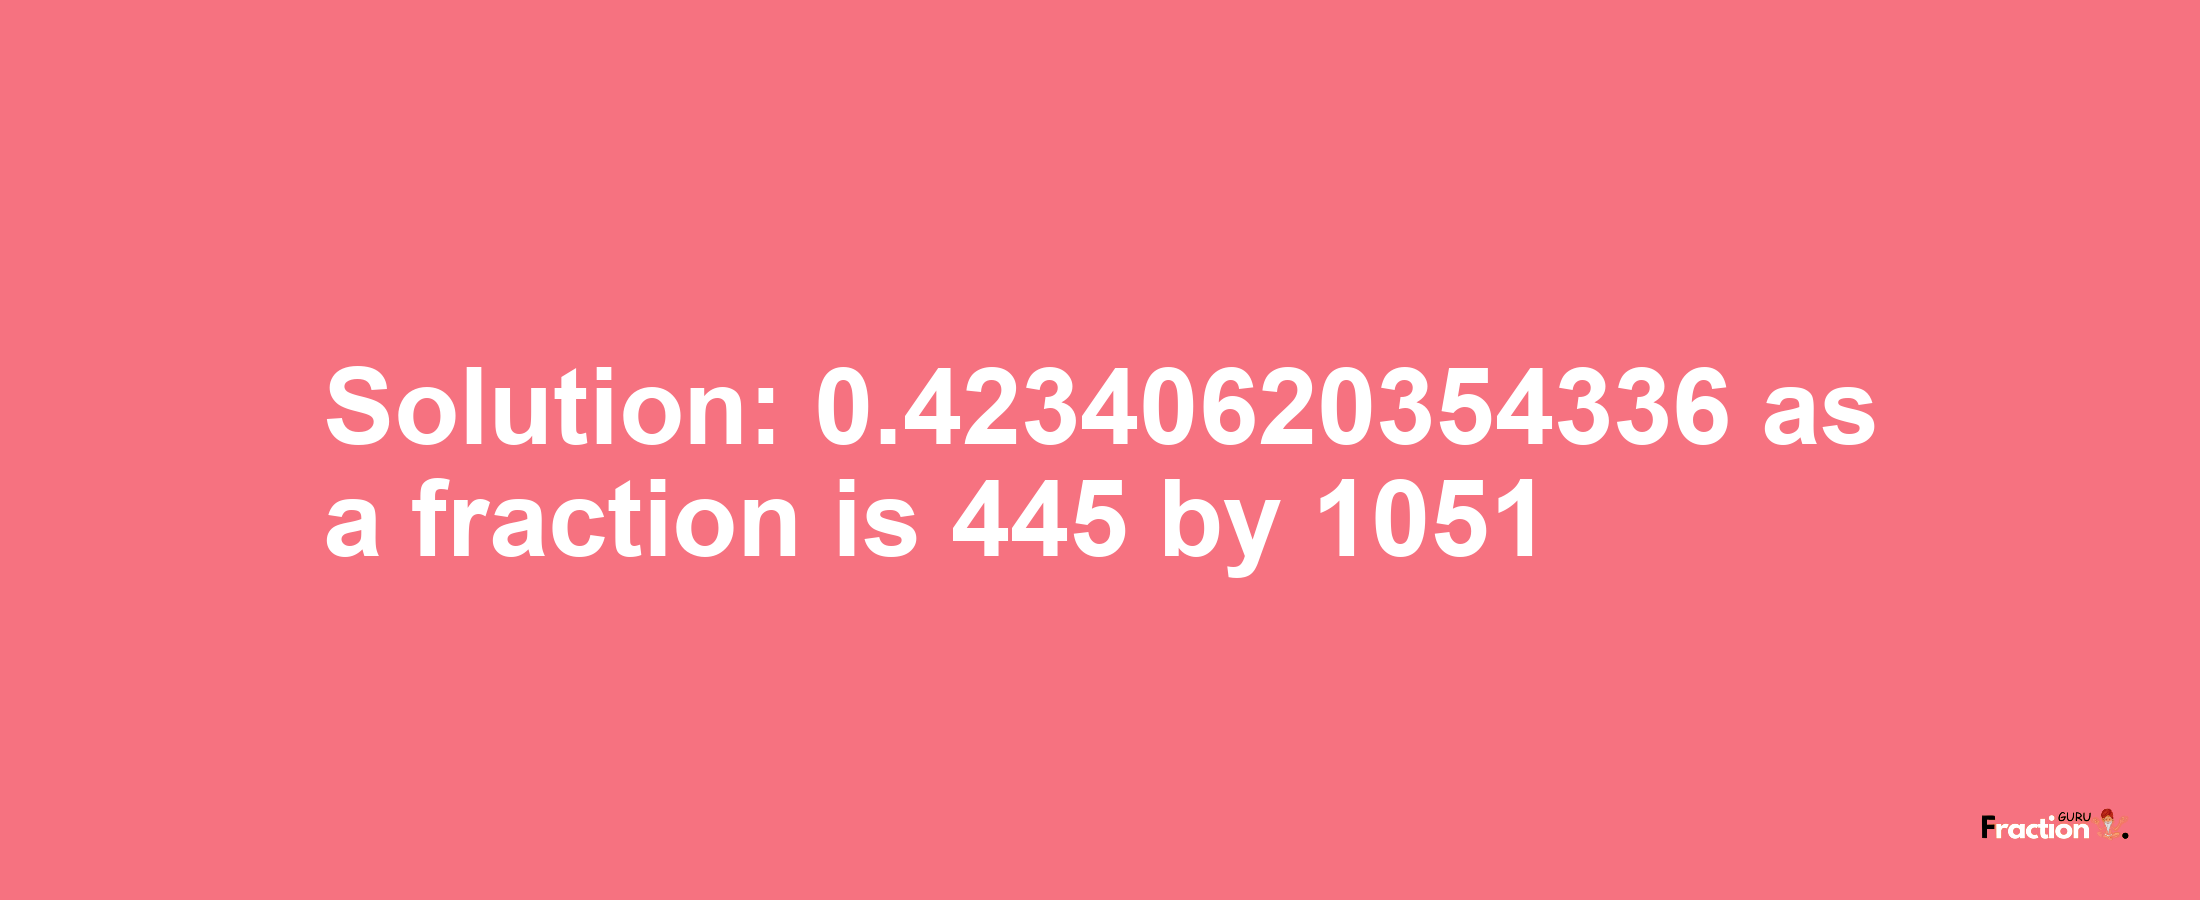 Solution:0.42340620354336 as a fraction is 445/1051